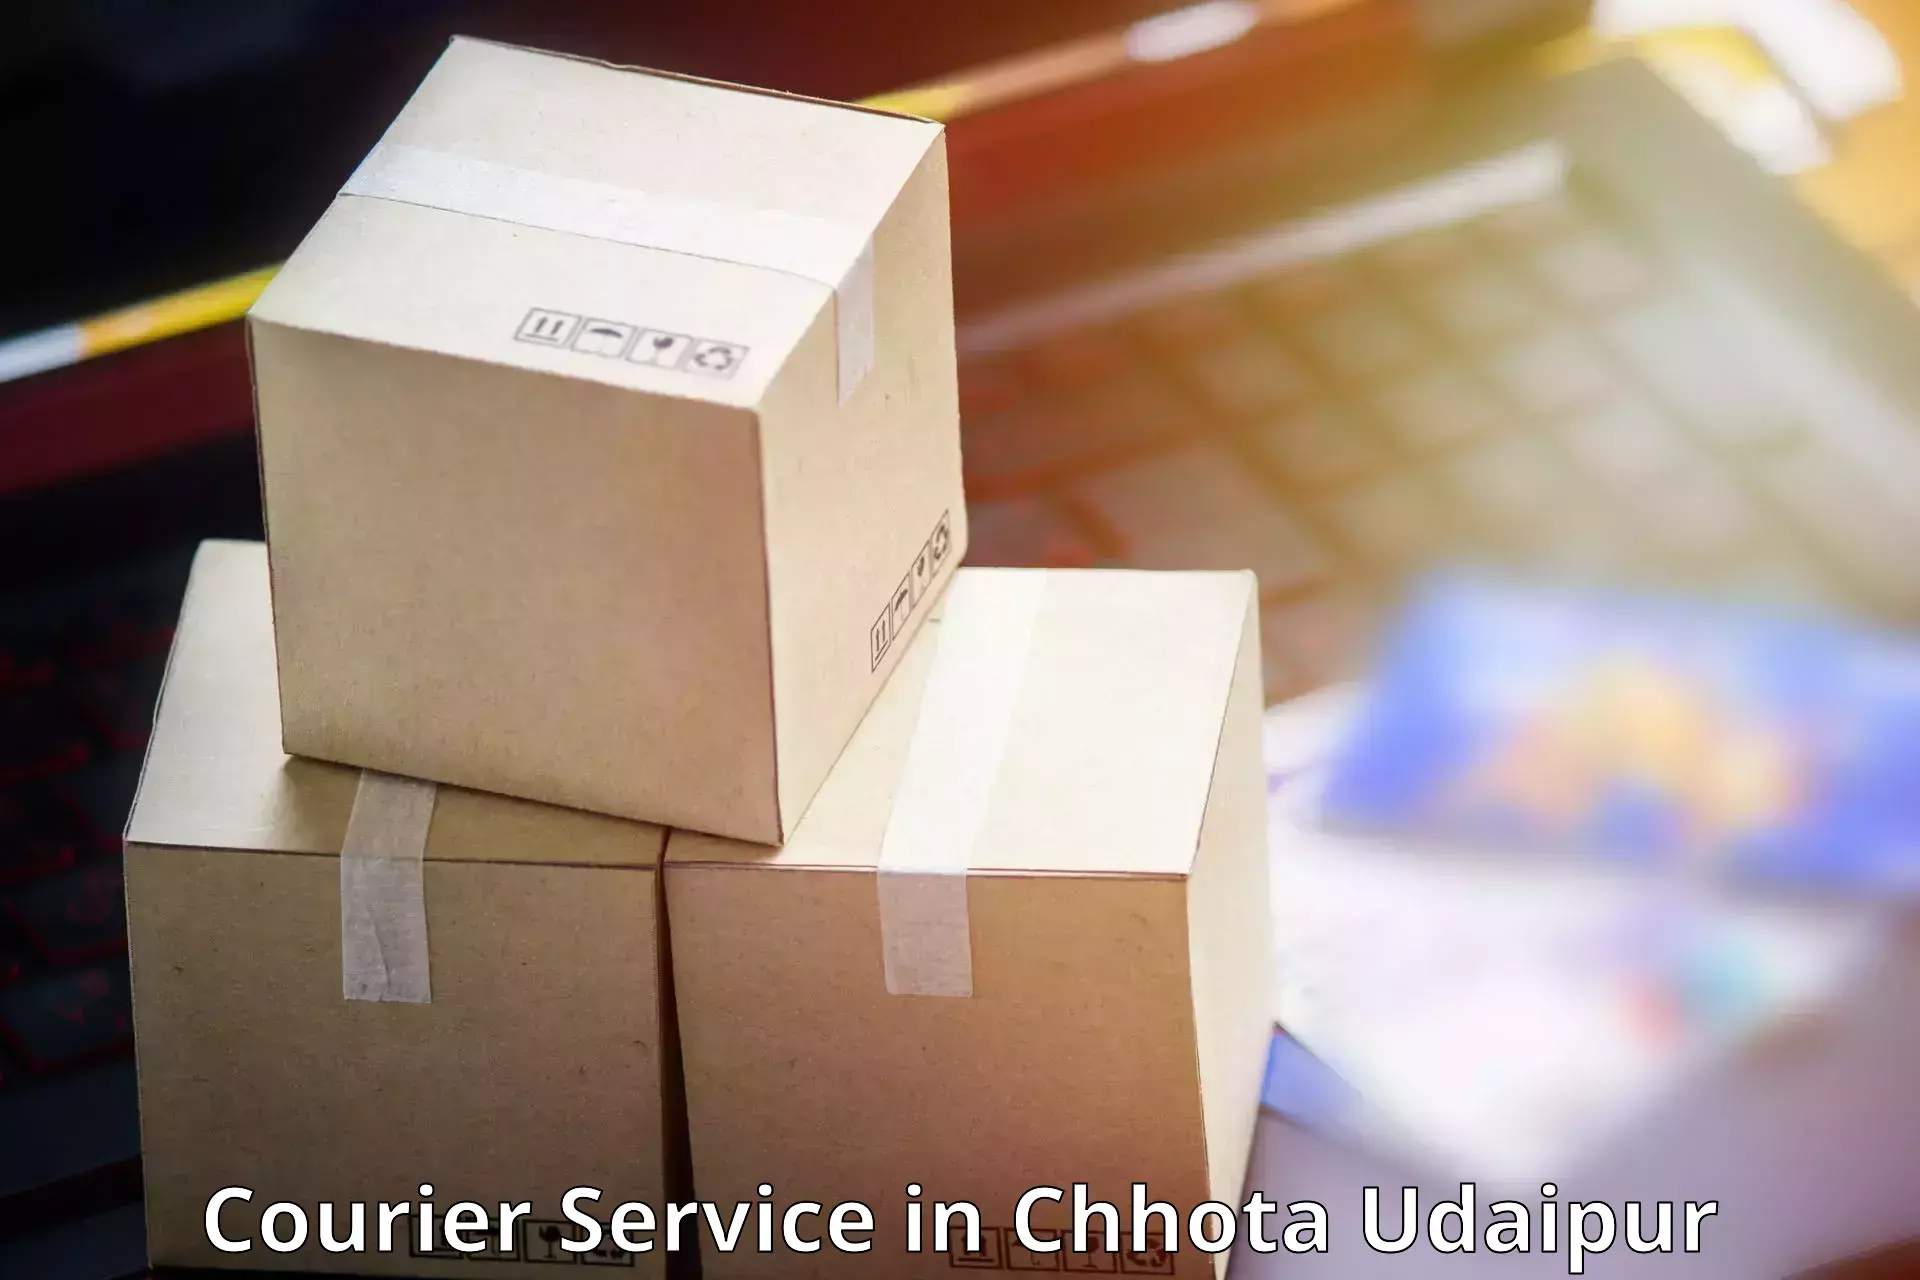 Logistics solutions in Chhota Udaipur